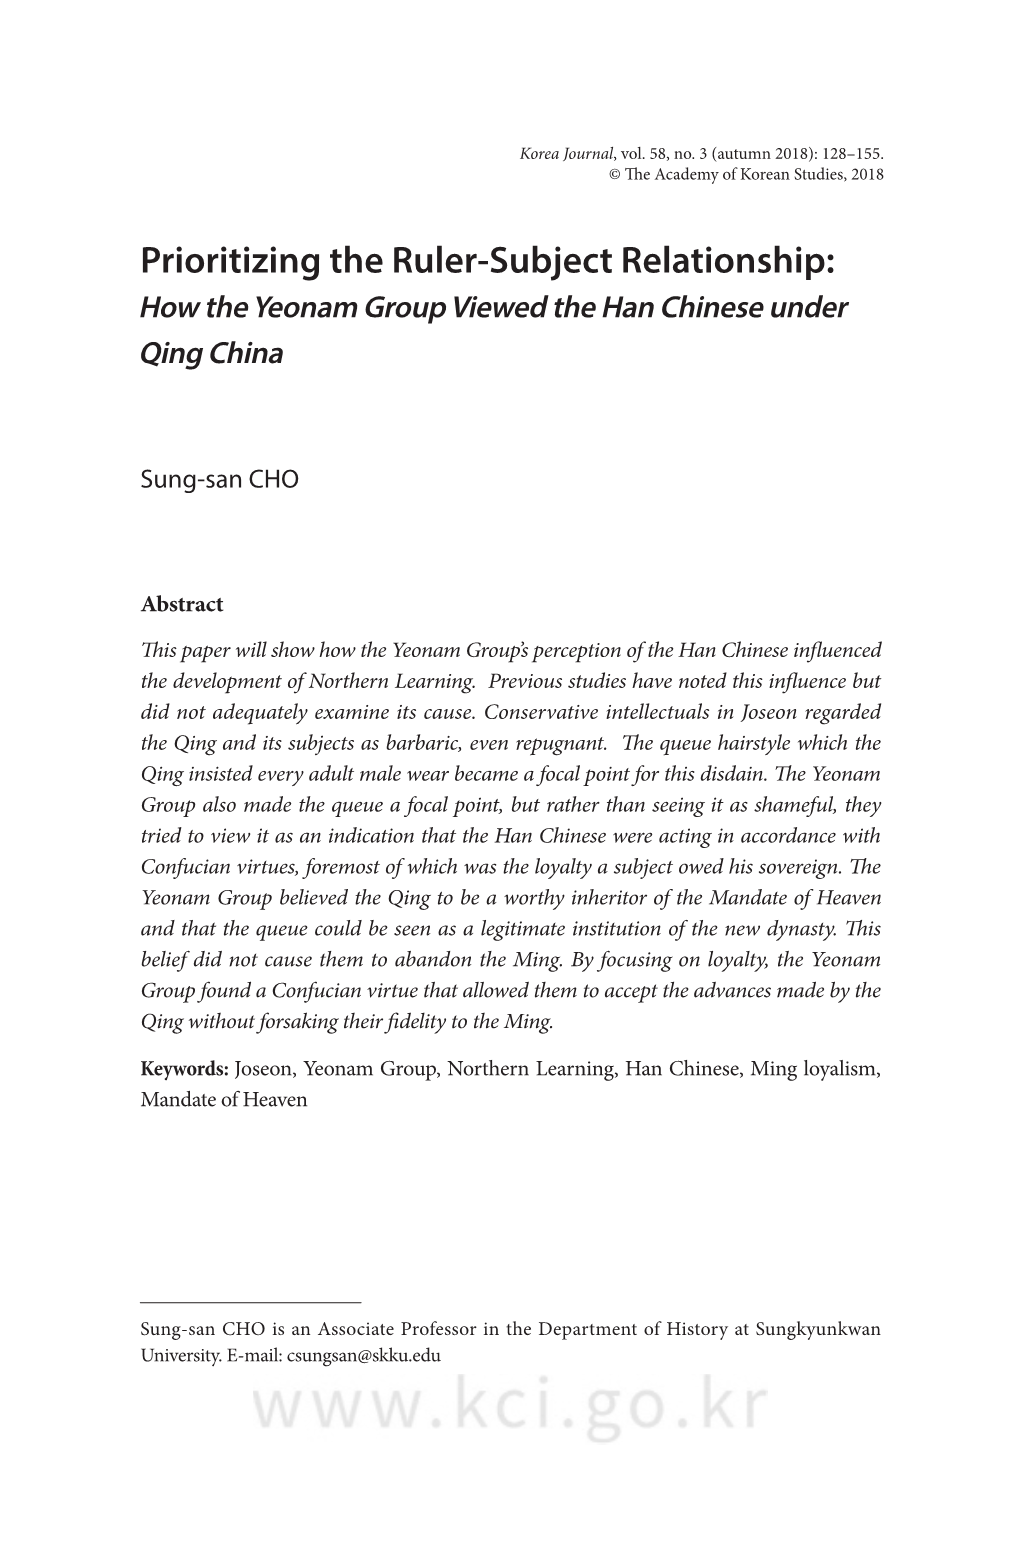 Prioritizing the Ruler-Subject Relationship: How the Yeonam Group Viewed the Han Chinese Under Qing China